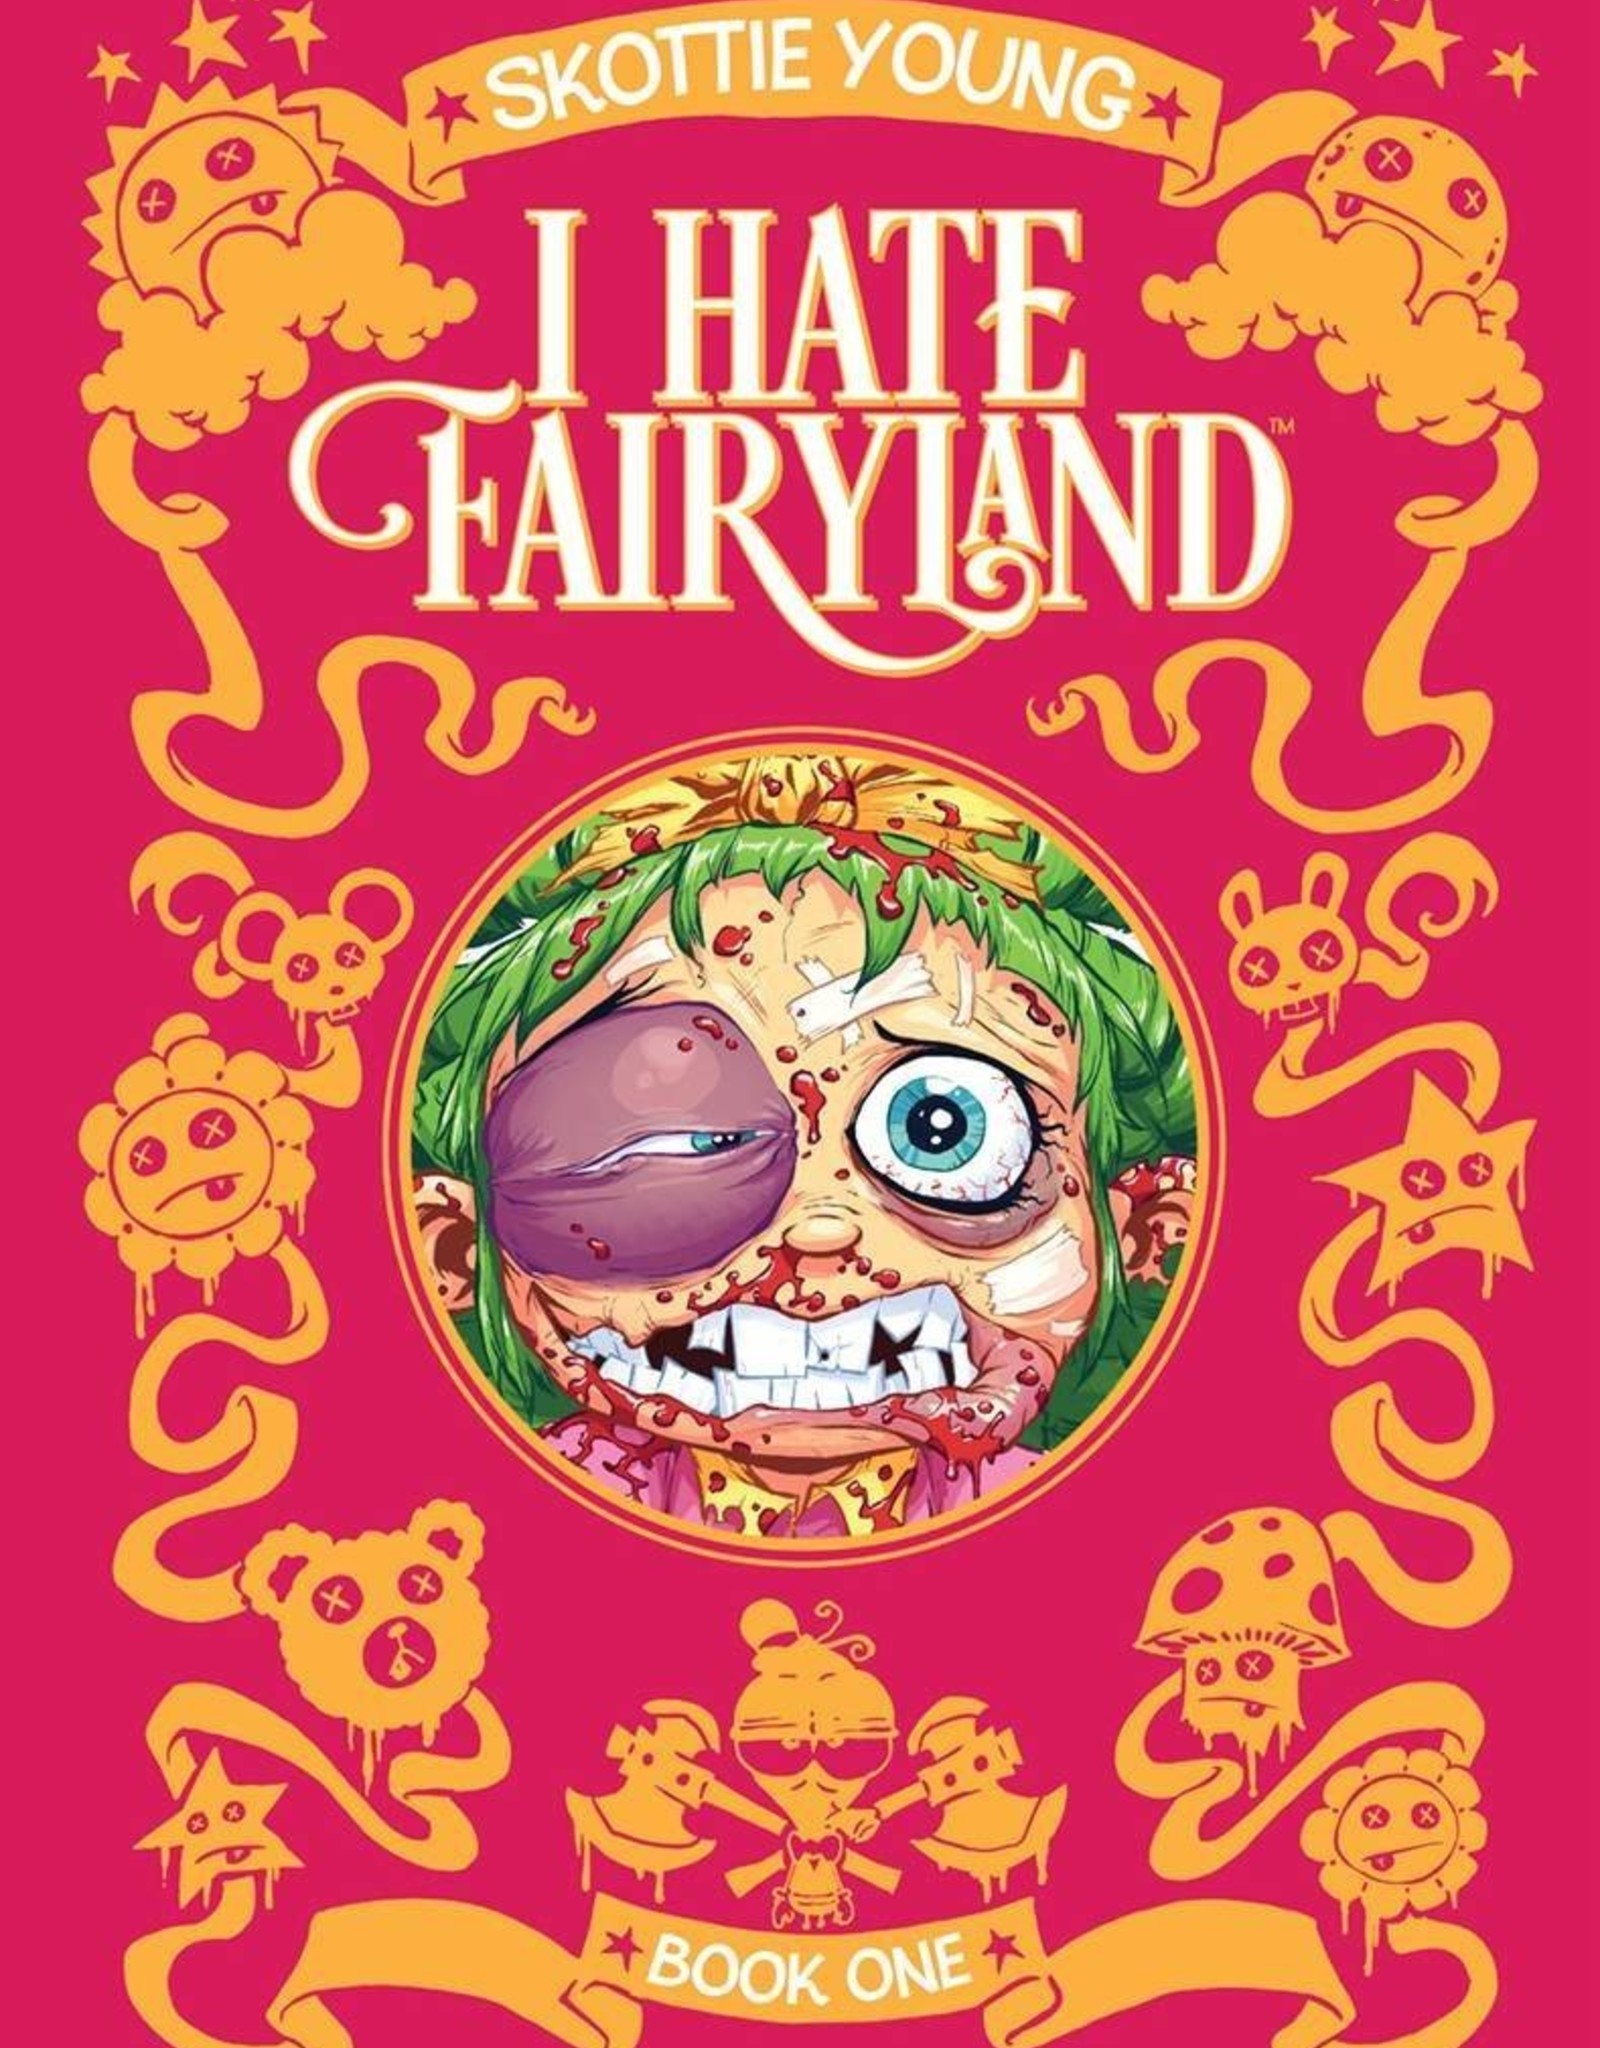 Image Comics I Hate Fairyland Deluxe Edition Hardcover Signed by Skottie Young